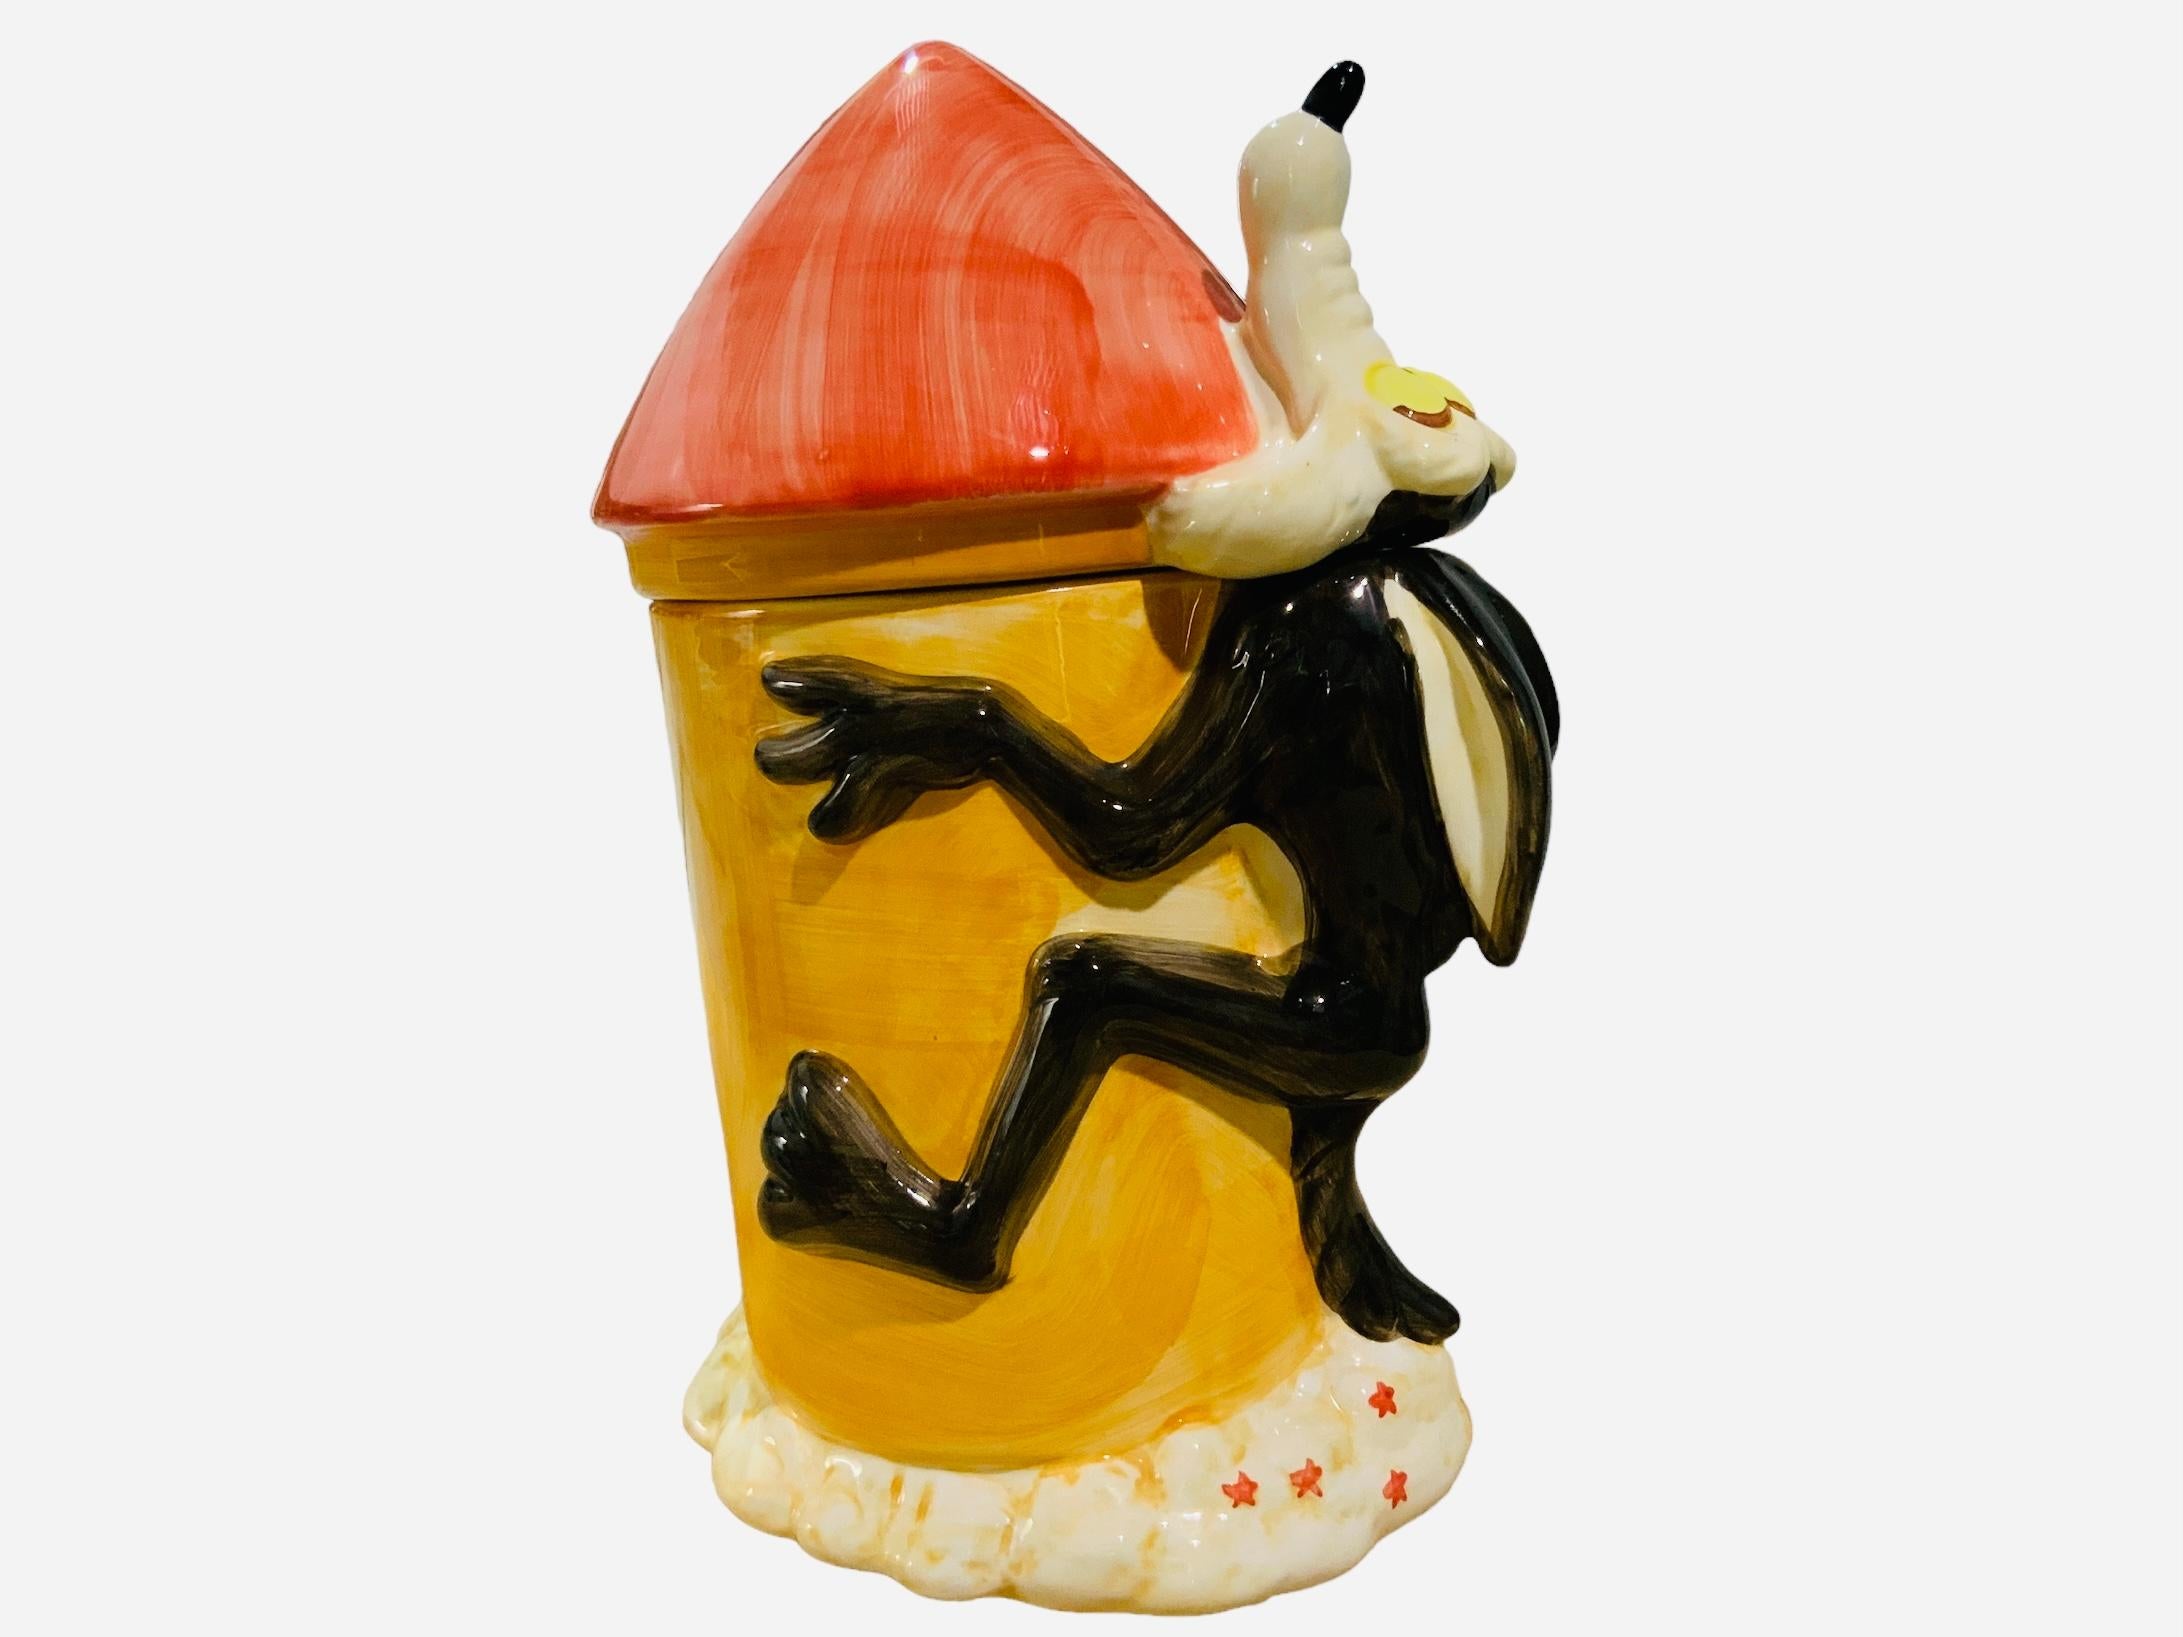 wile e coyote cookie jar